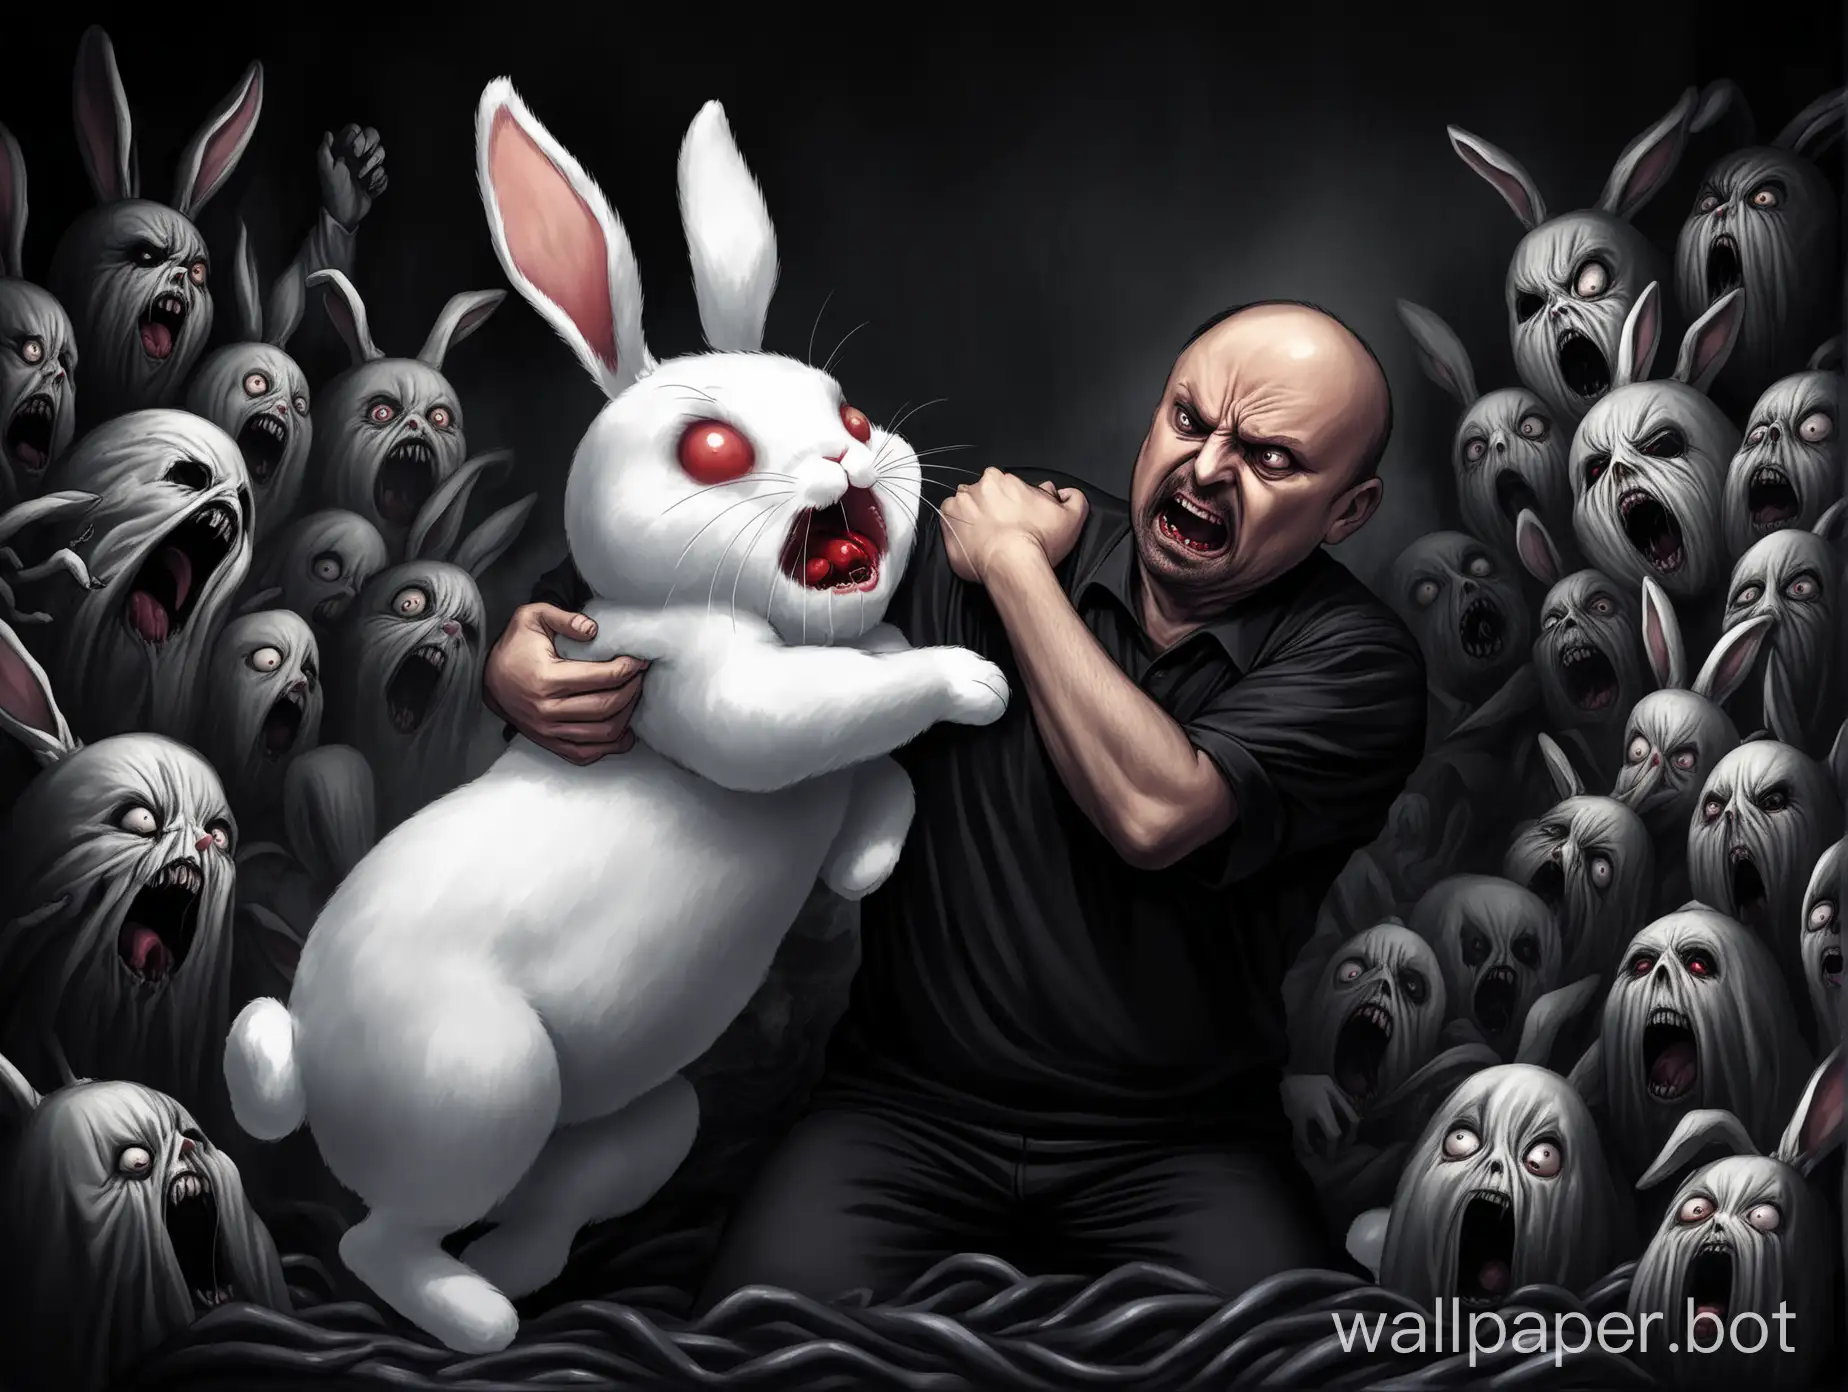 Scared rabbit being  squeezed and squashed by its dark and scary evil owner.